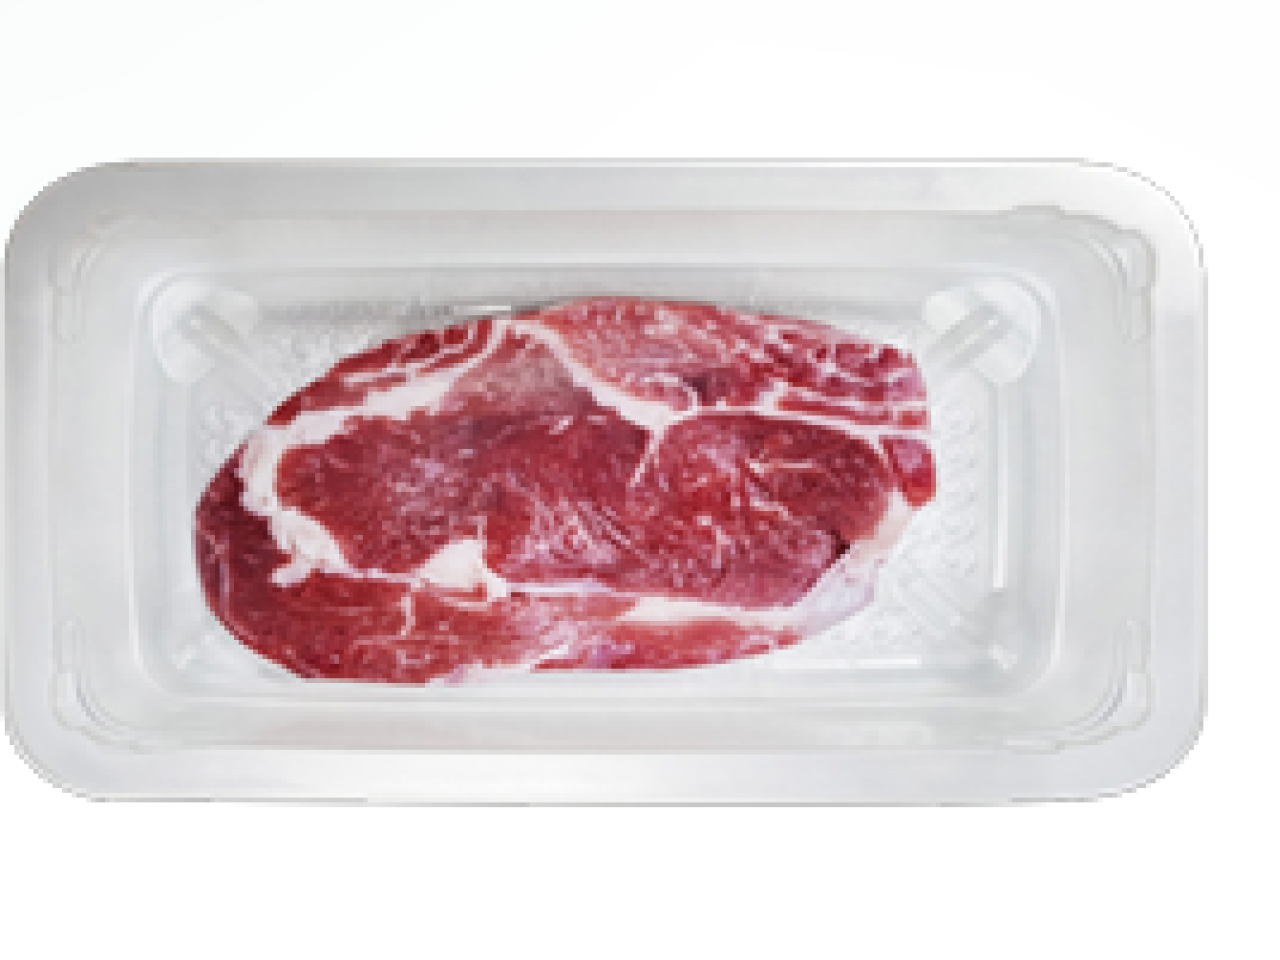 A cut of meat in a clear sealed package.